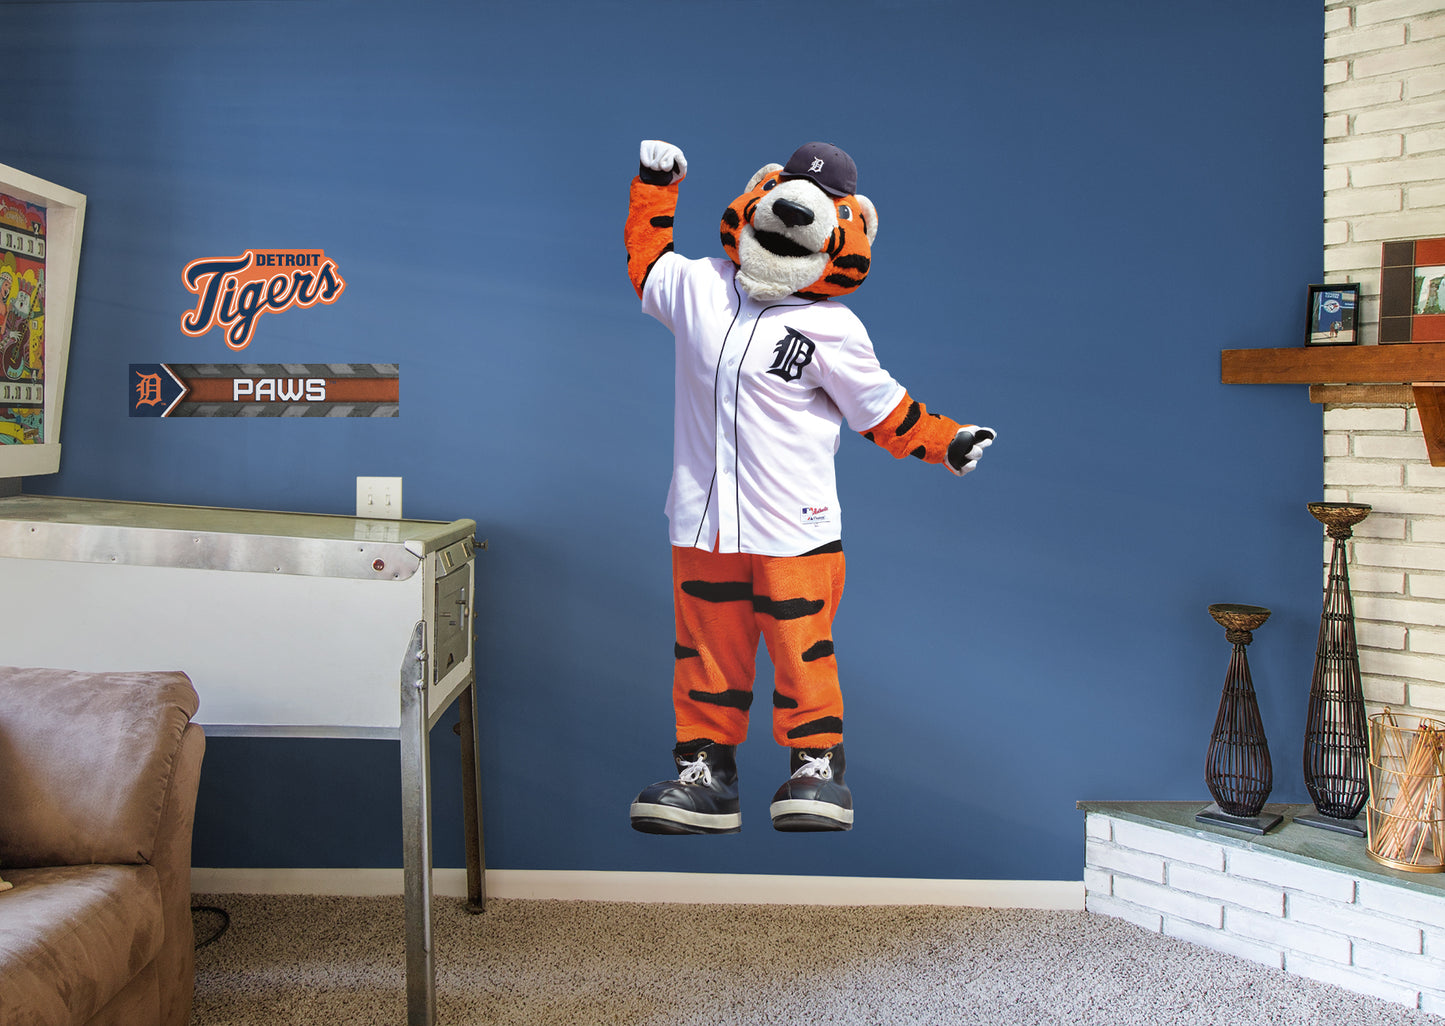 Detroit Tigers: Paws 2021 Mascot - Officially Licensed MLB